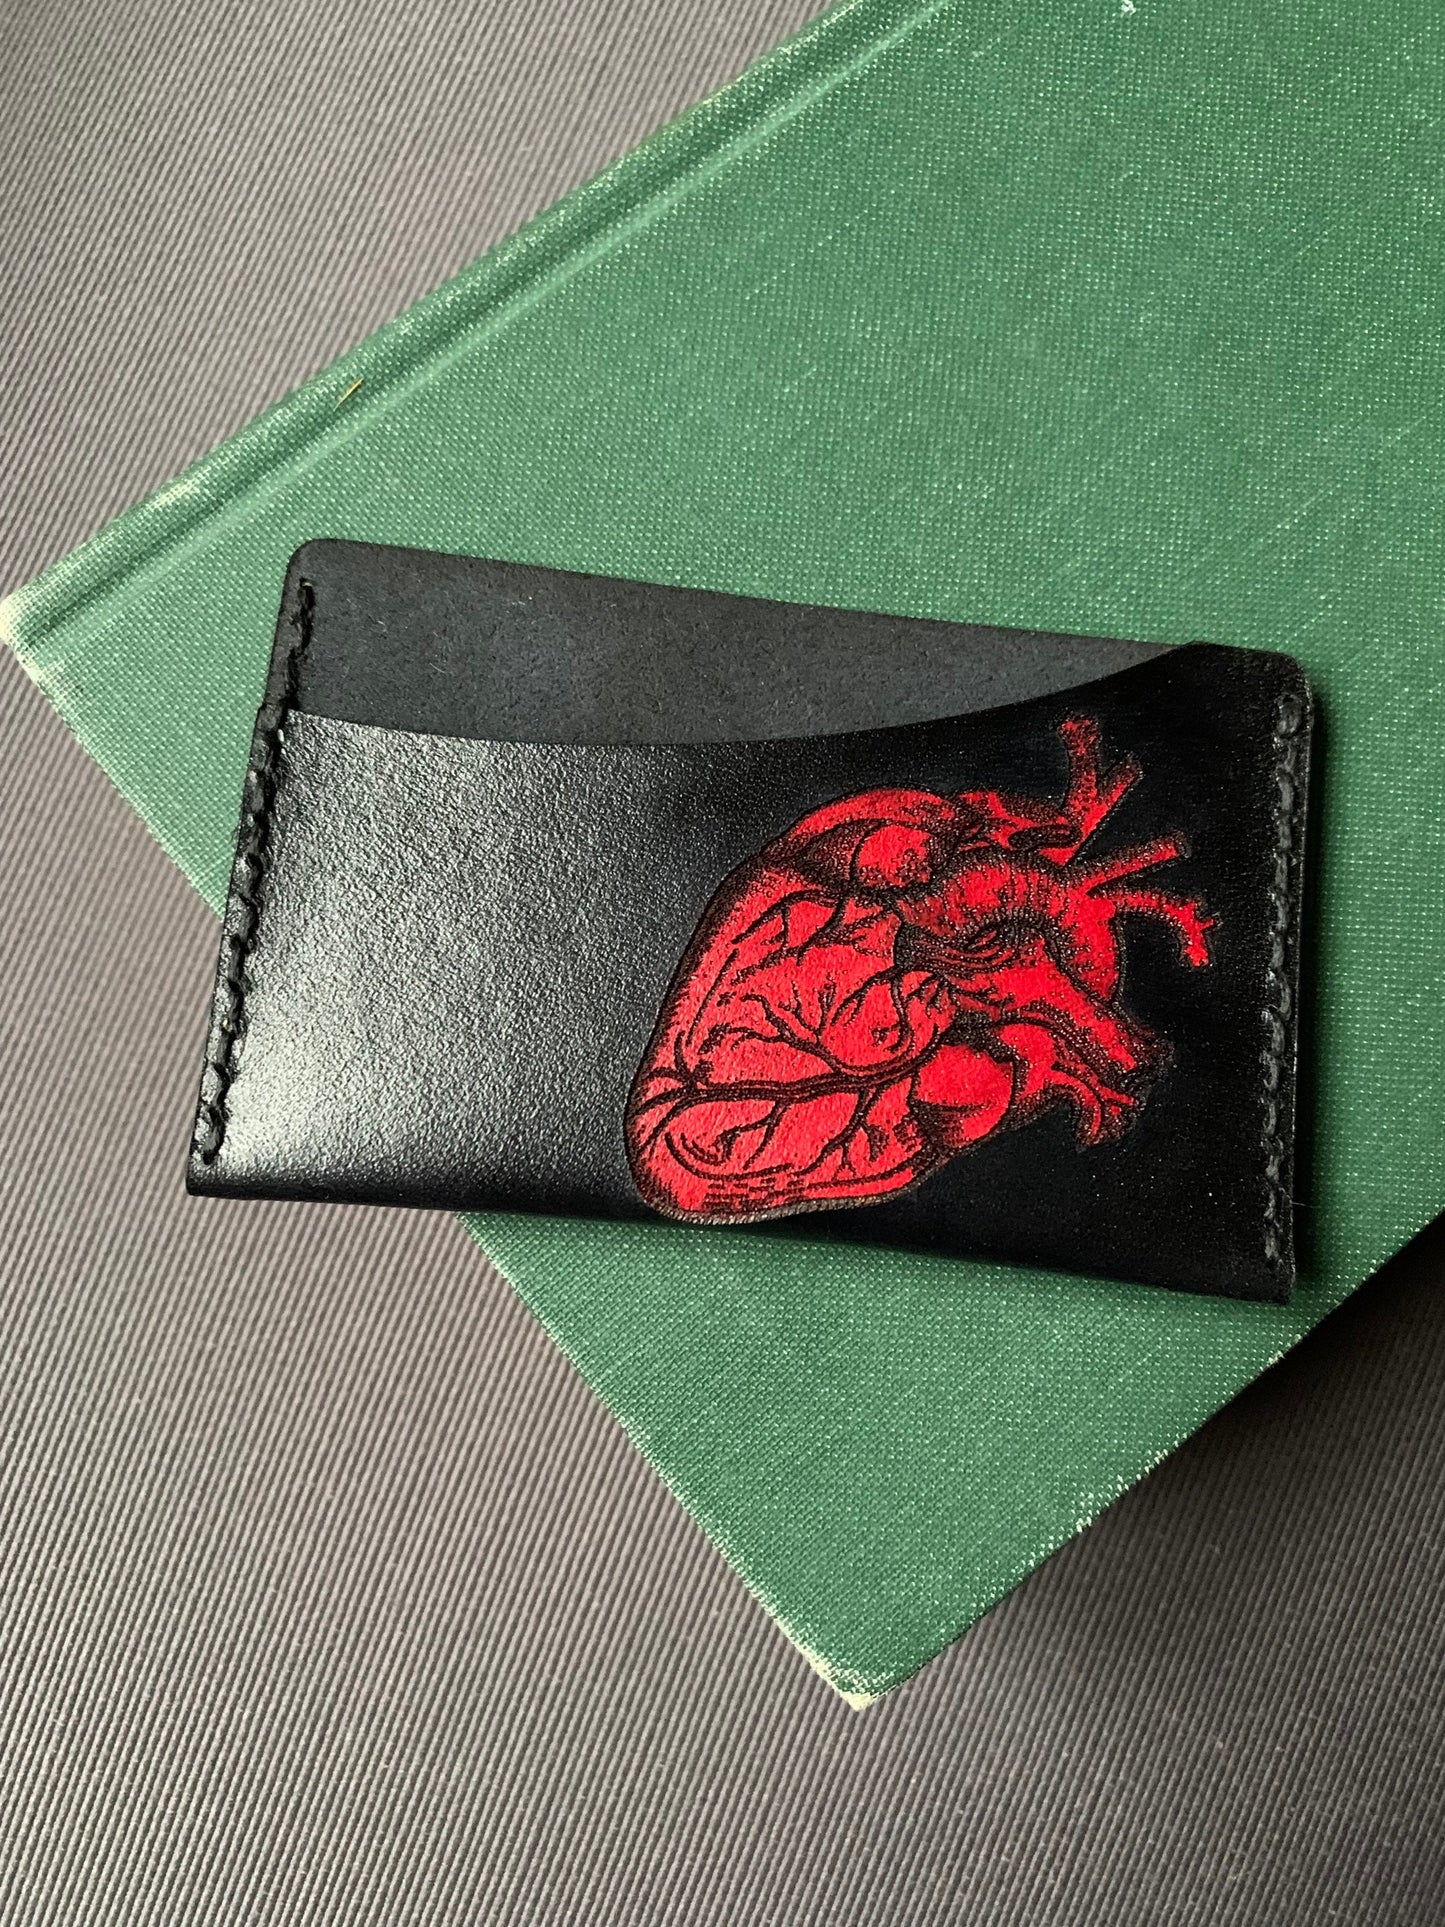 Anatomical Heart Single Pocket Leather Card Holder Black with Red